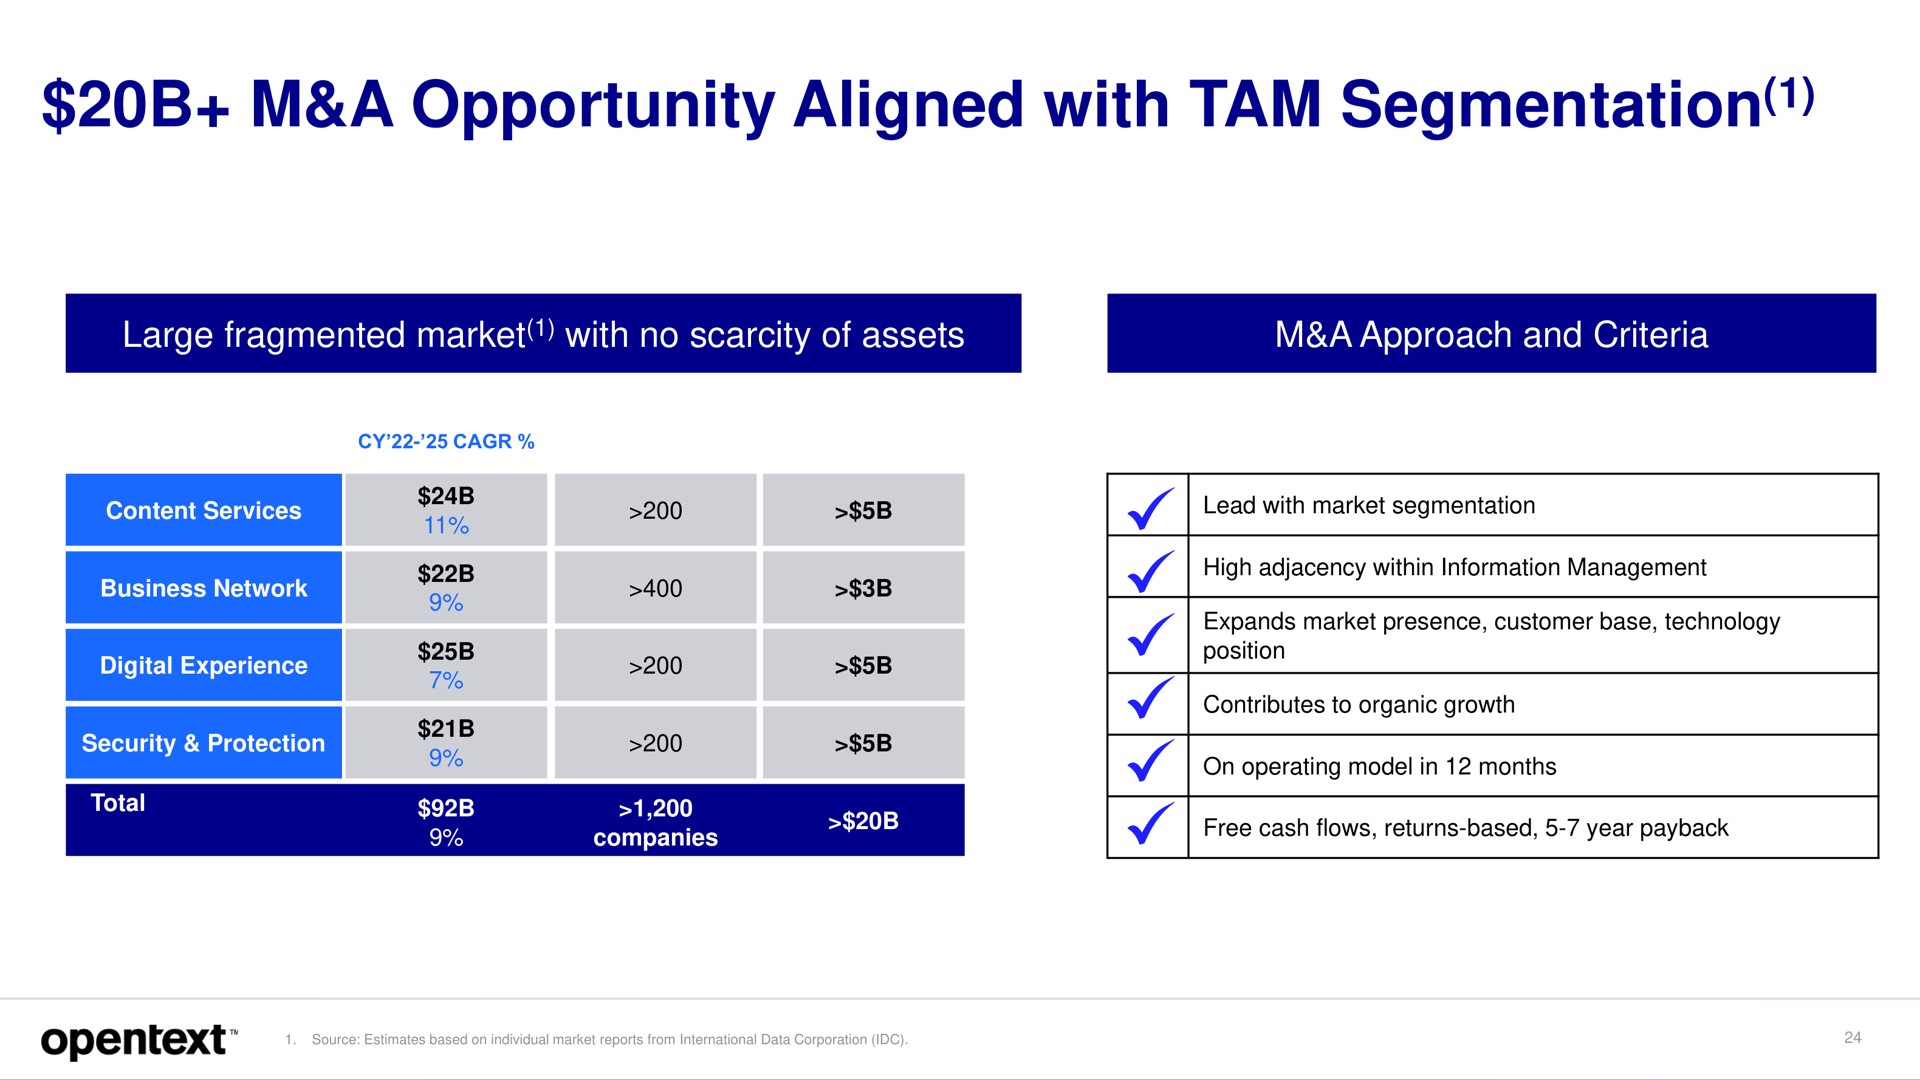 a opportunity aligned with tam segmentation | OpenText